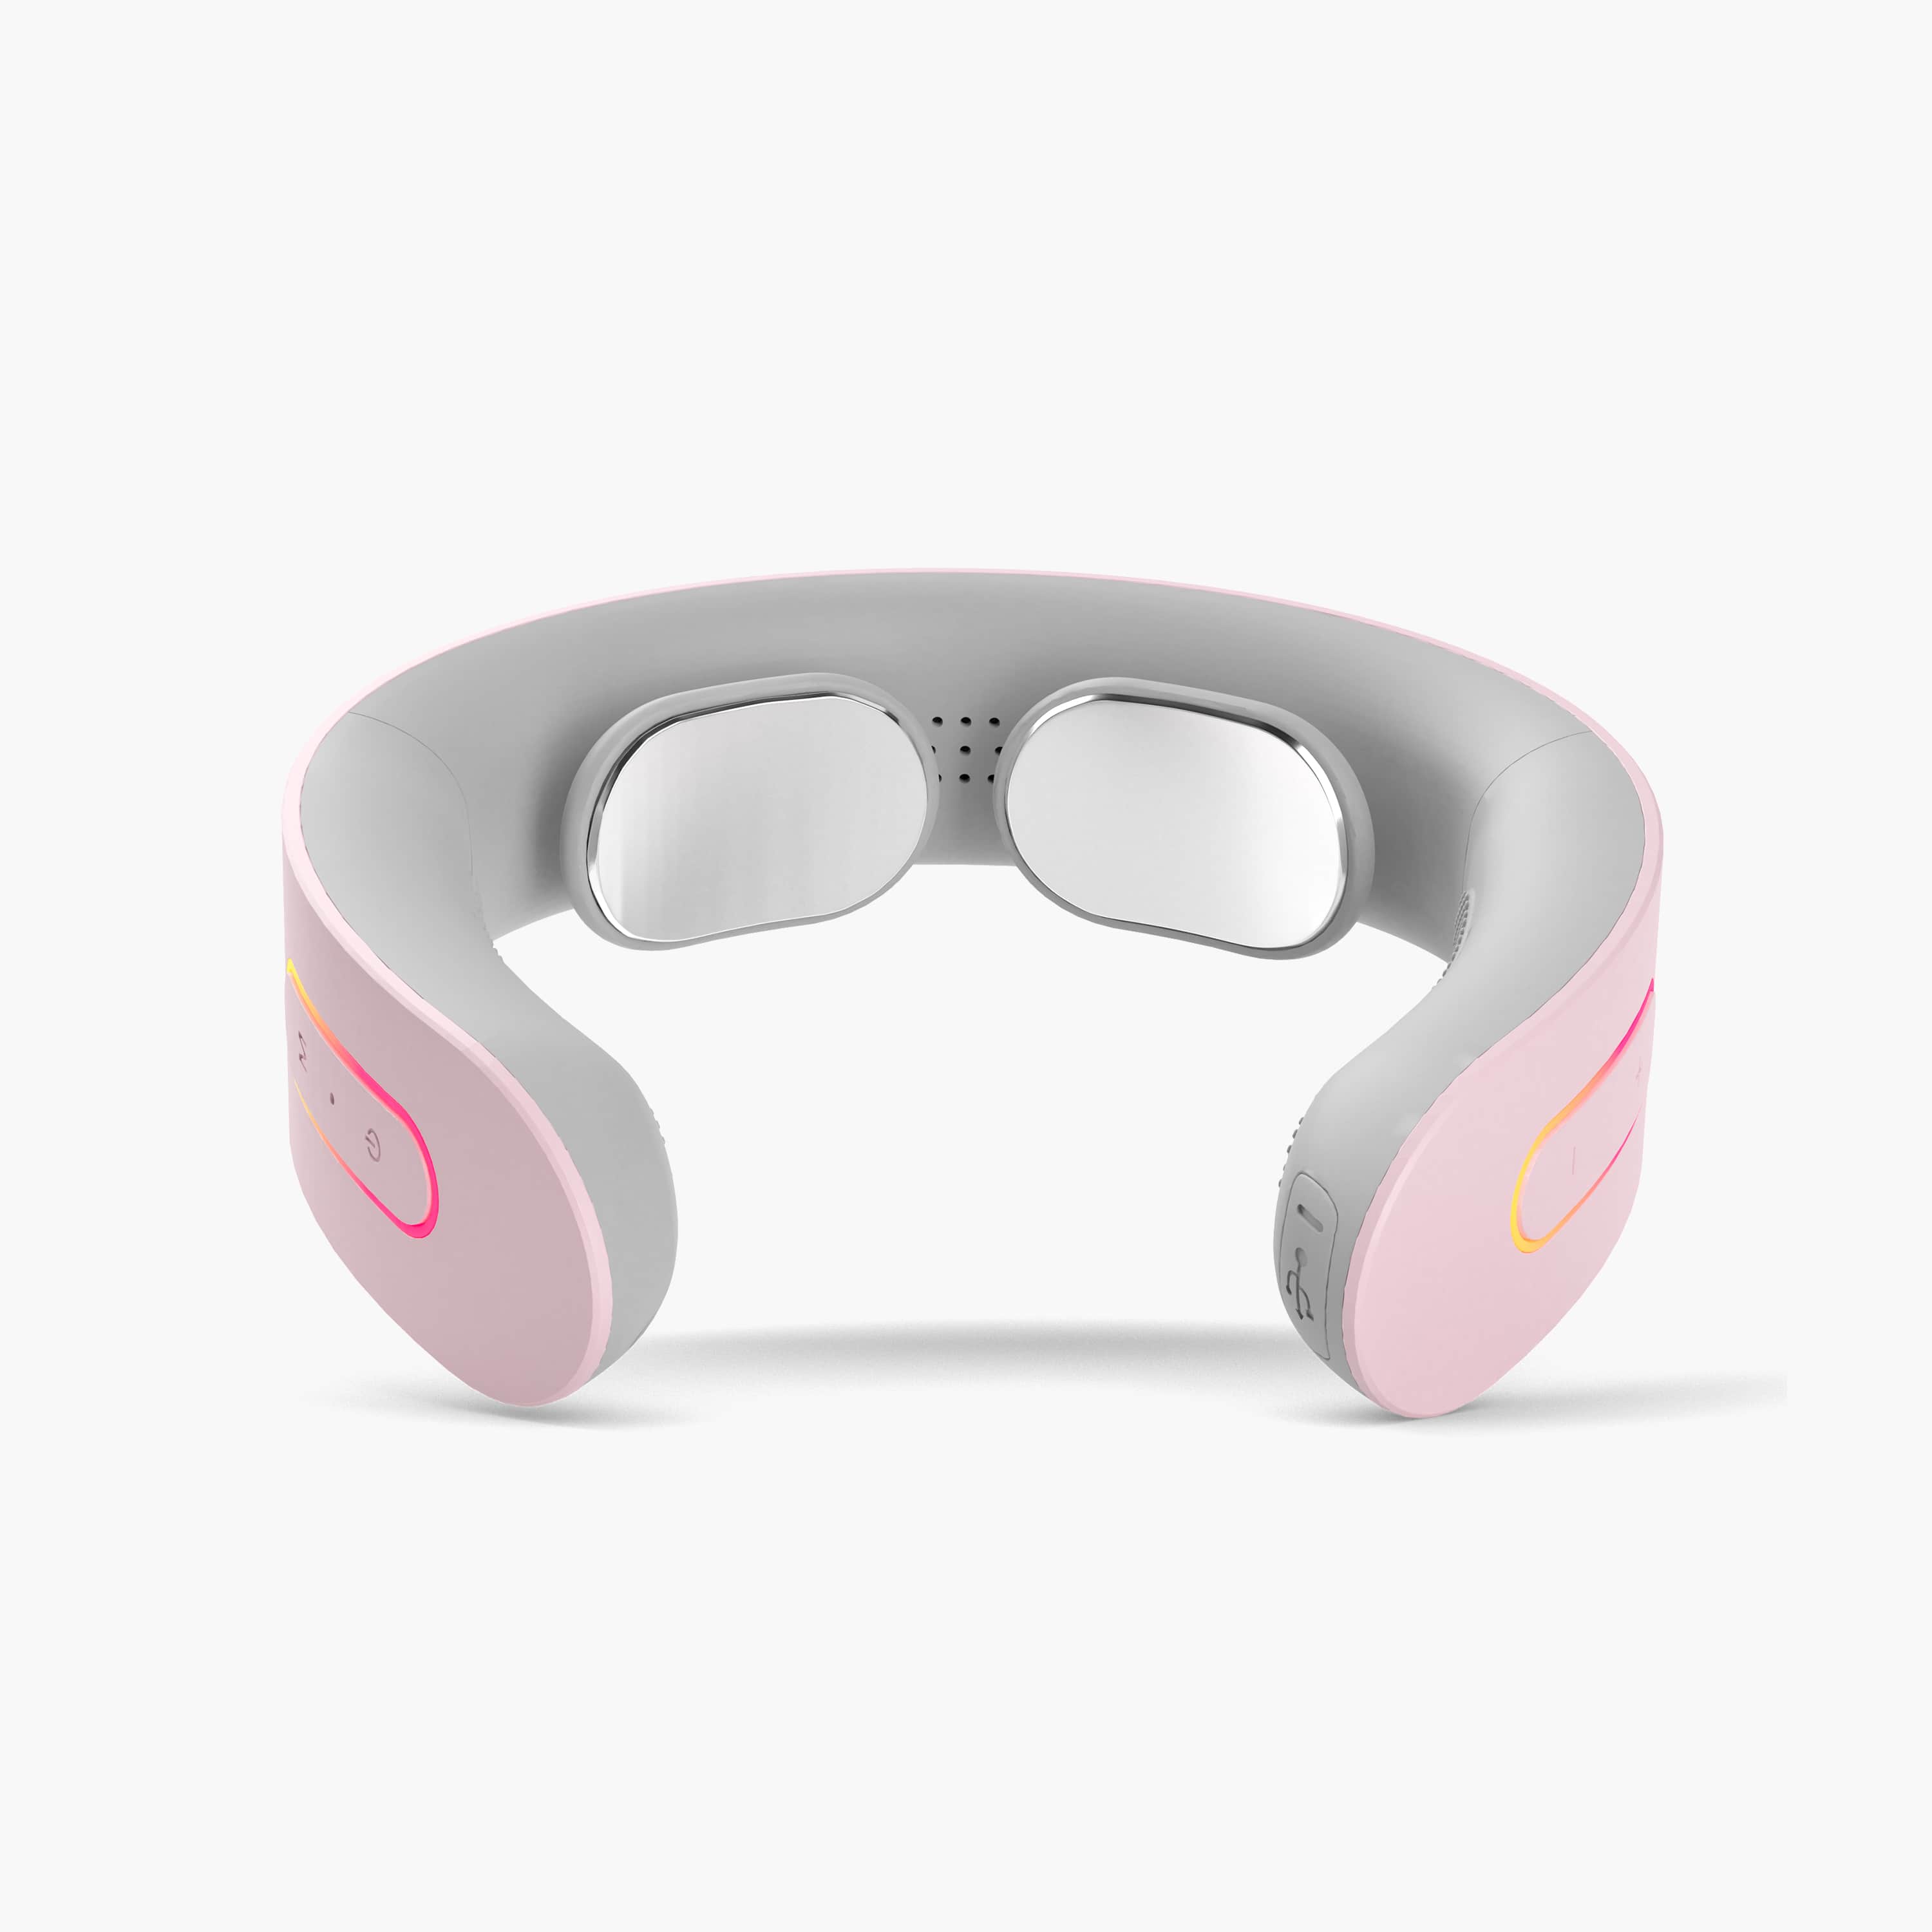 Luna by Nomisk. A pink neck massager that combines heat and pulse therapy to instantly relieve neck pain. Use her to relieve migraines, muscle tension and pain instantly. Shown from a front view.